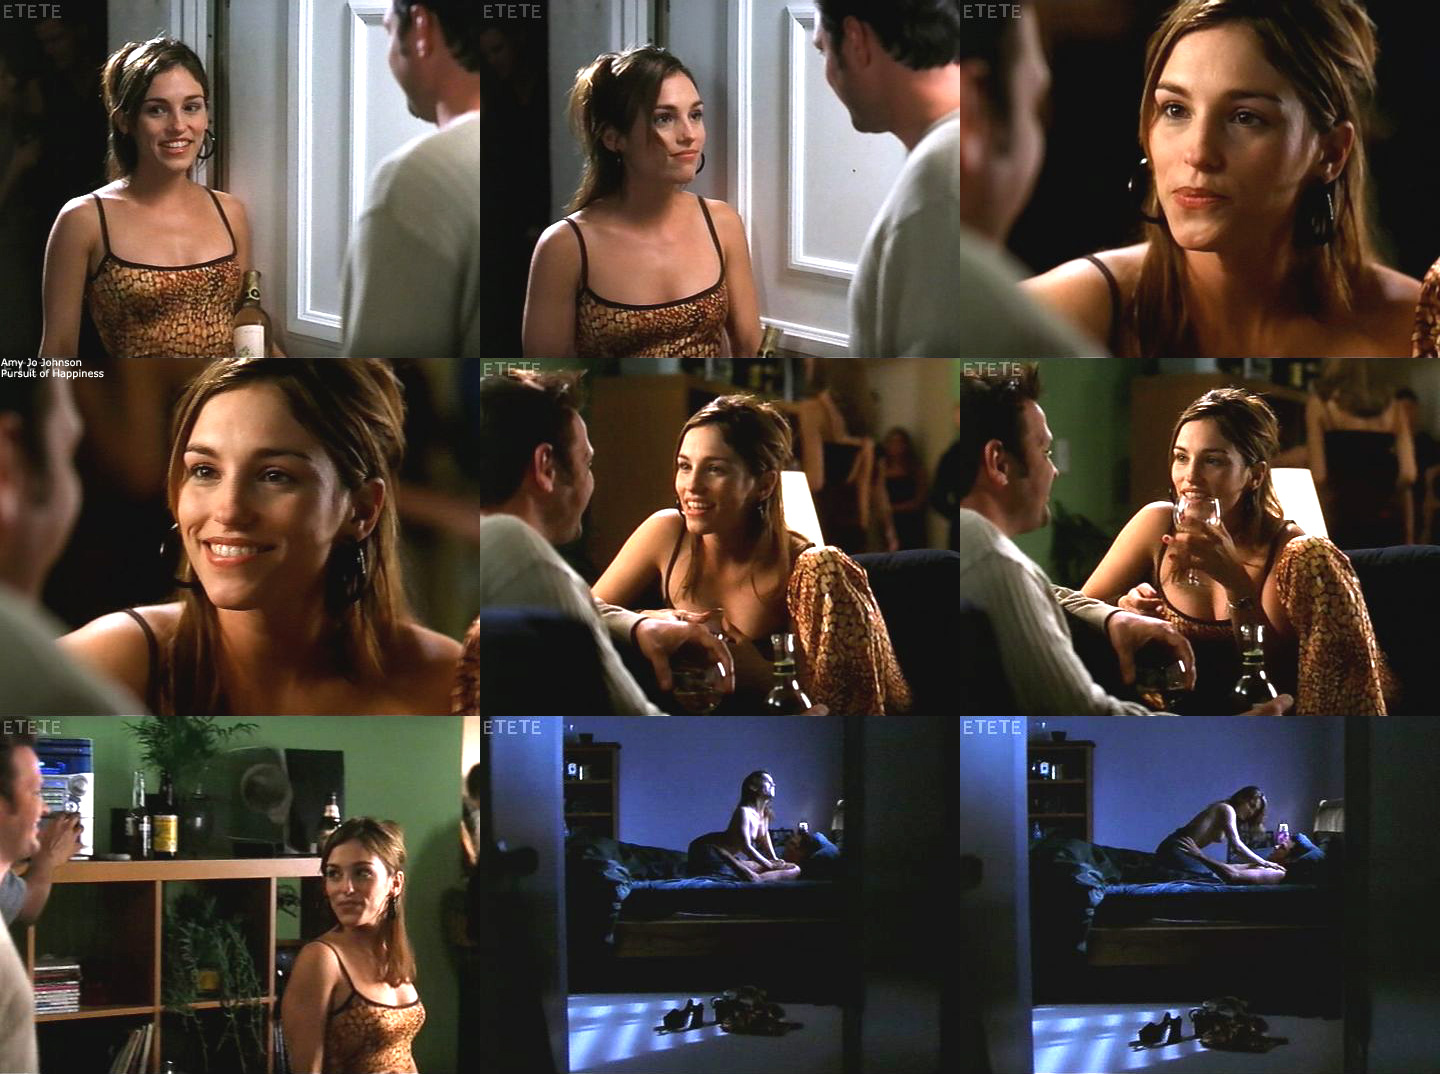 Amy jo johnson pursuit of happiness nude